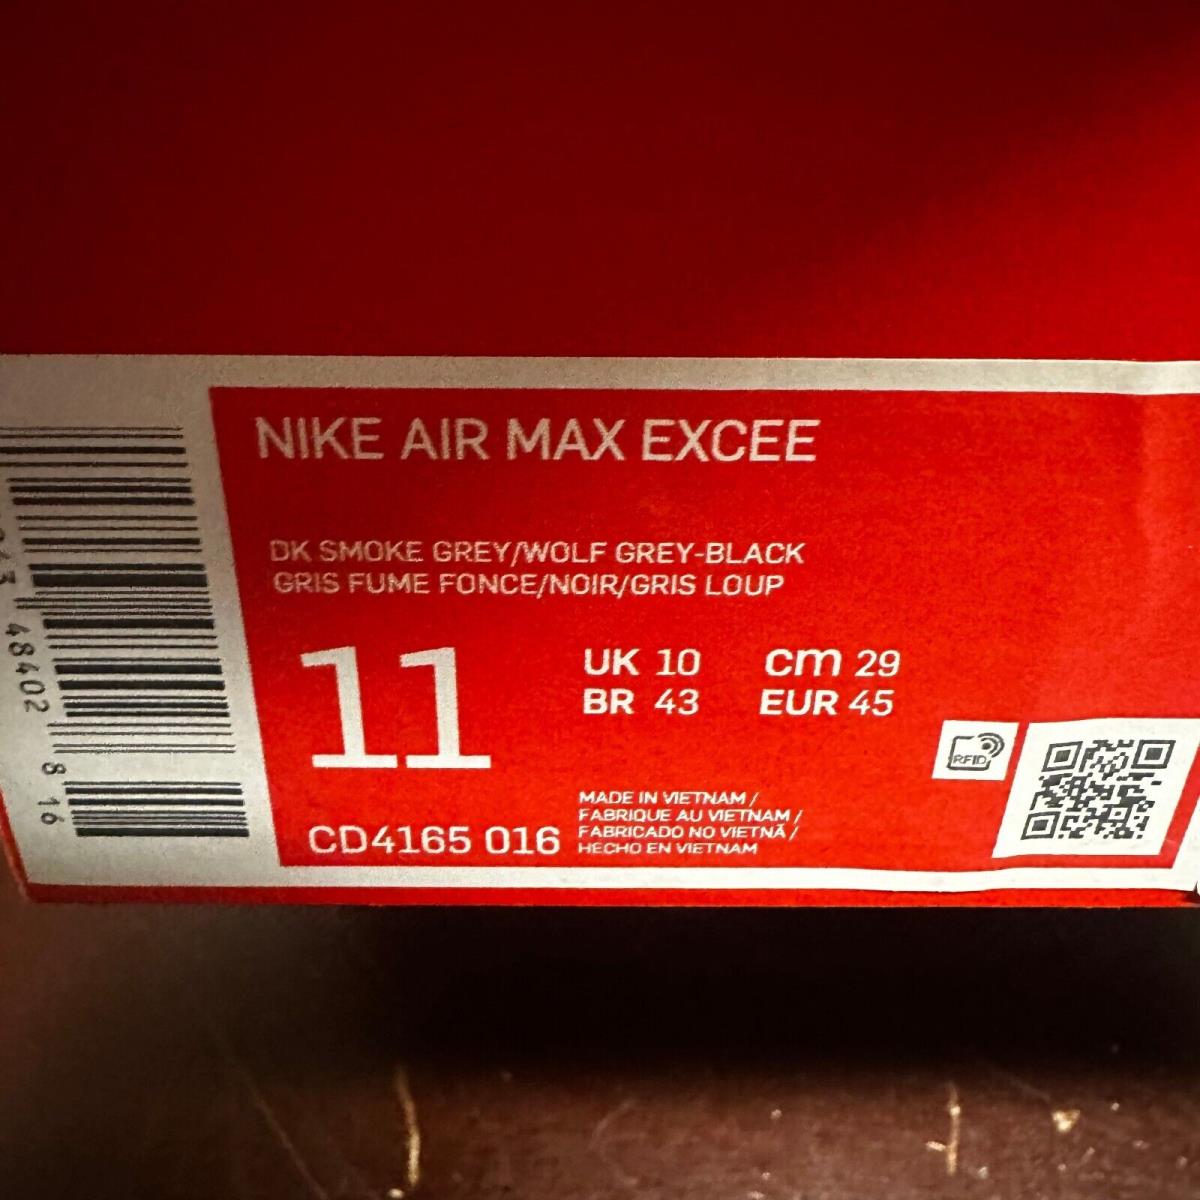 Nike shoes Air Max Excee - Gray, Black 3